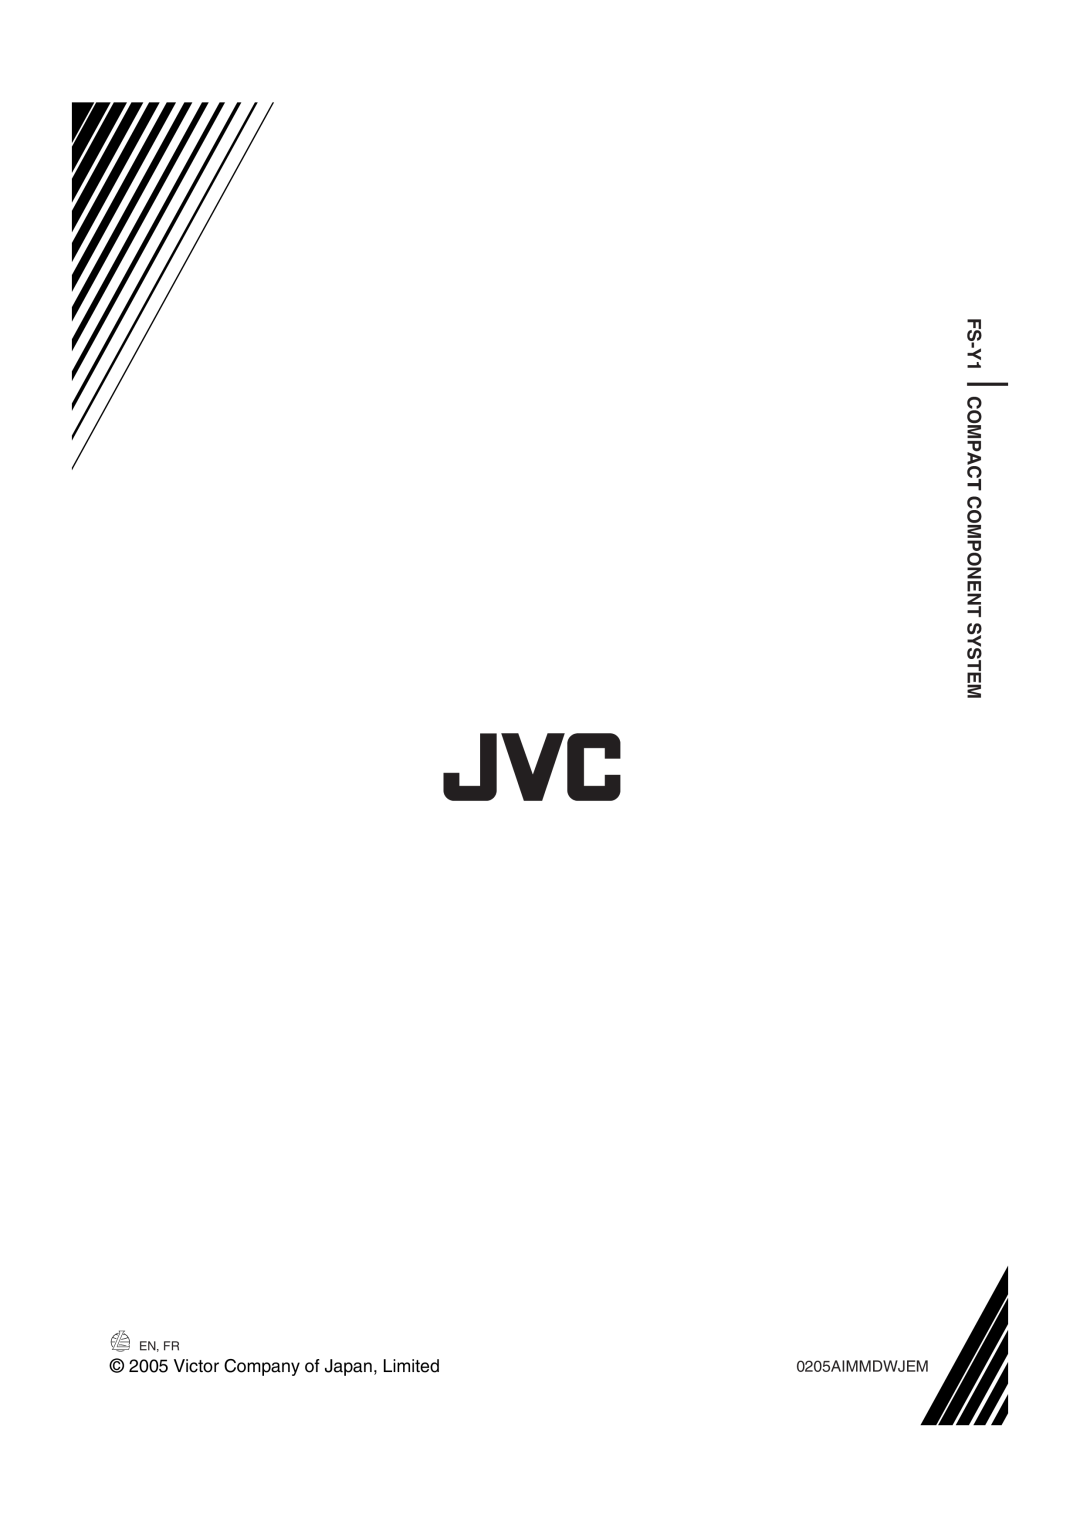 JVC GVT0142-001A manual FS-Y1COMPACT COMPONENT SYSTEM, c 2005 Victor Company of Japan, Limited, 0205AIMMDWJEM, En, Fr 